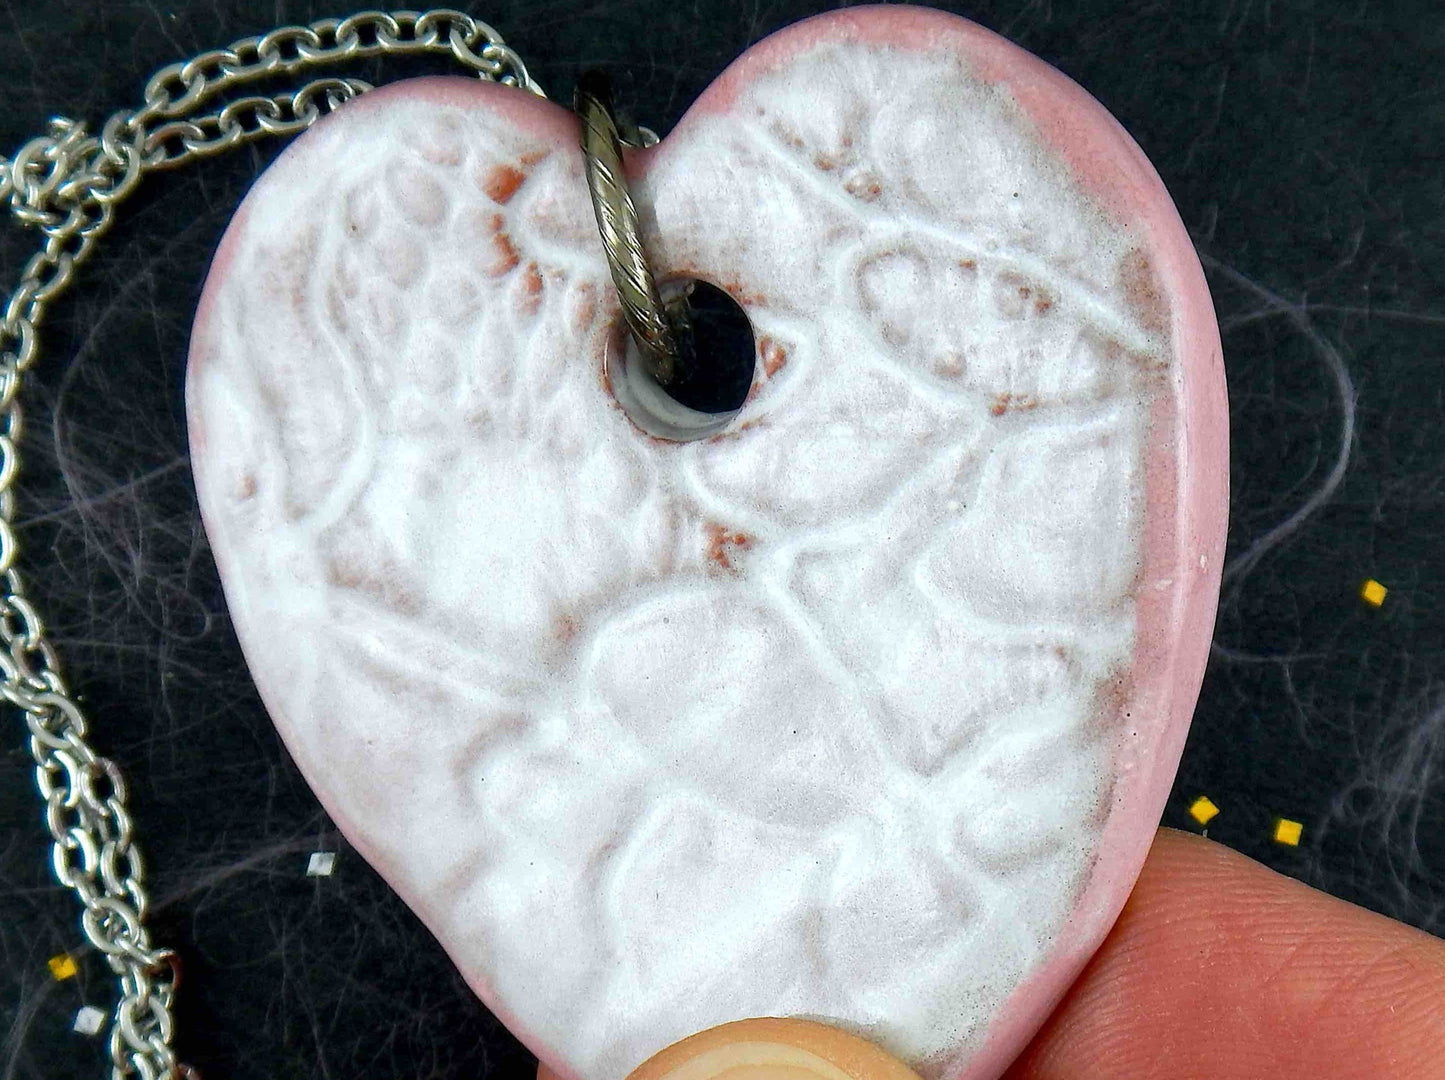 16-inch necklace with off-white ceramic heart pendant handmade in Montreal, lace pattern, stainless steel chain